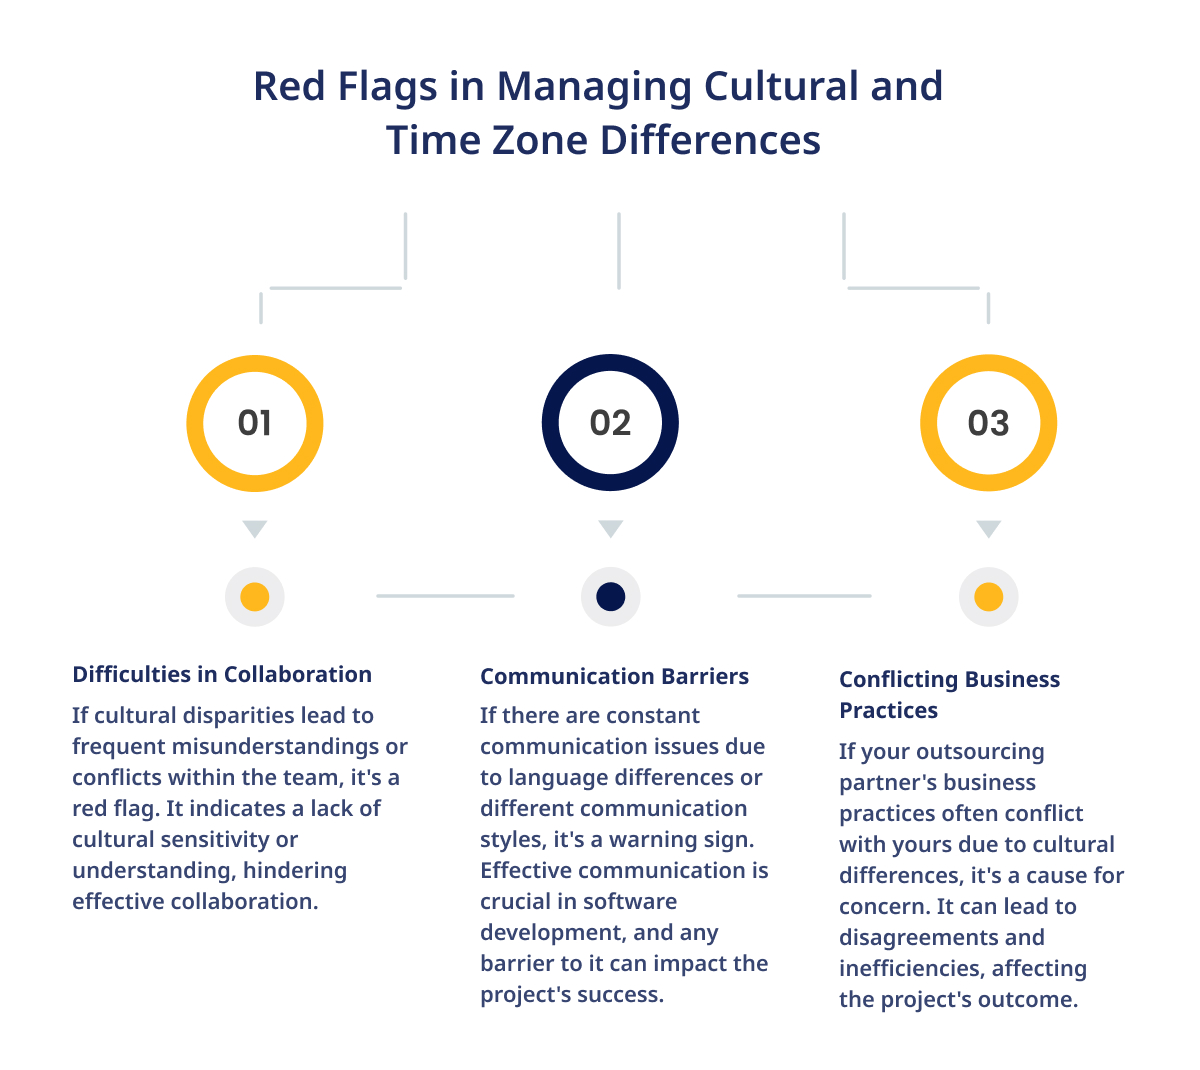 Red Flags in Managing Cultural and Time Zone Differences